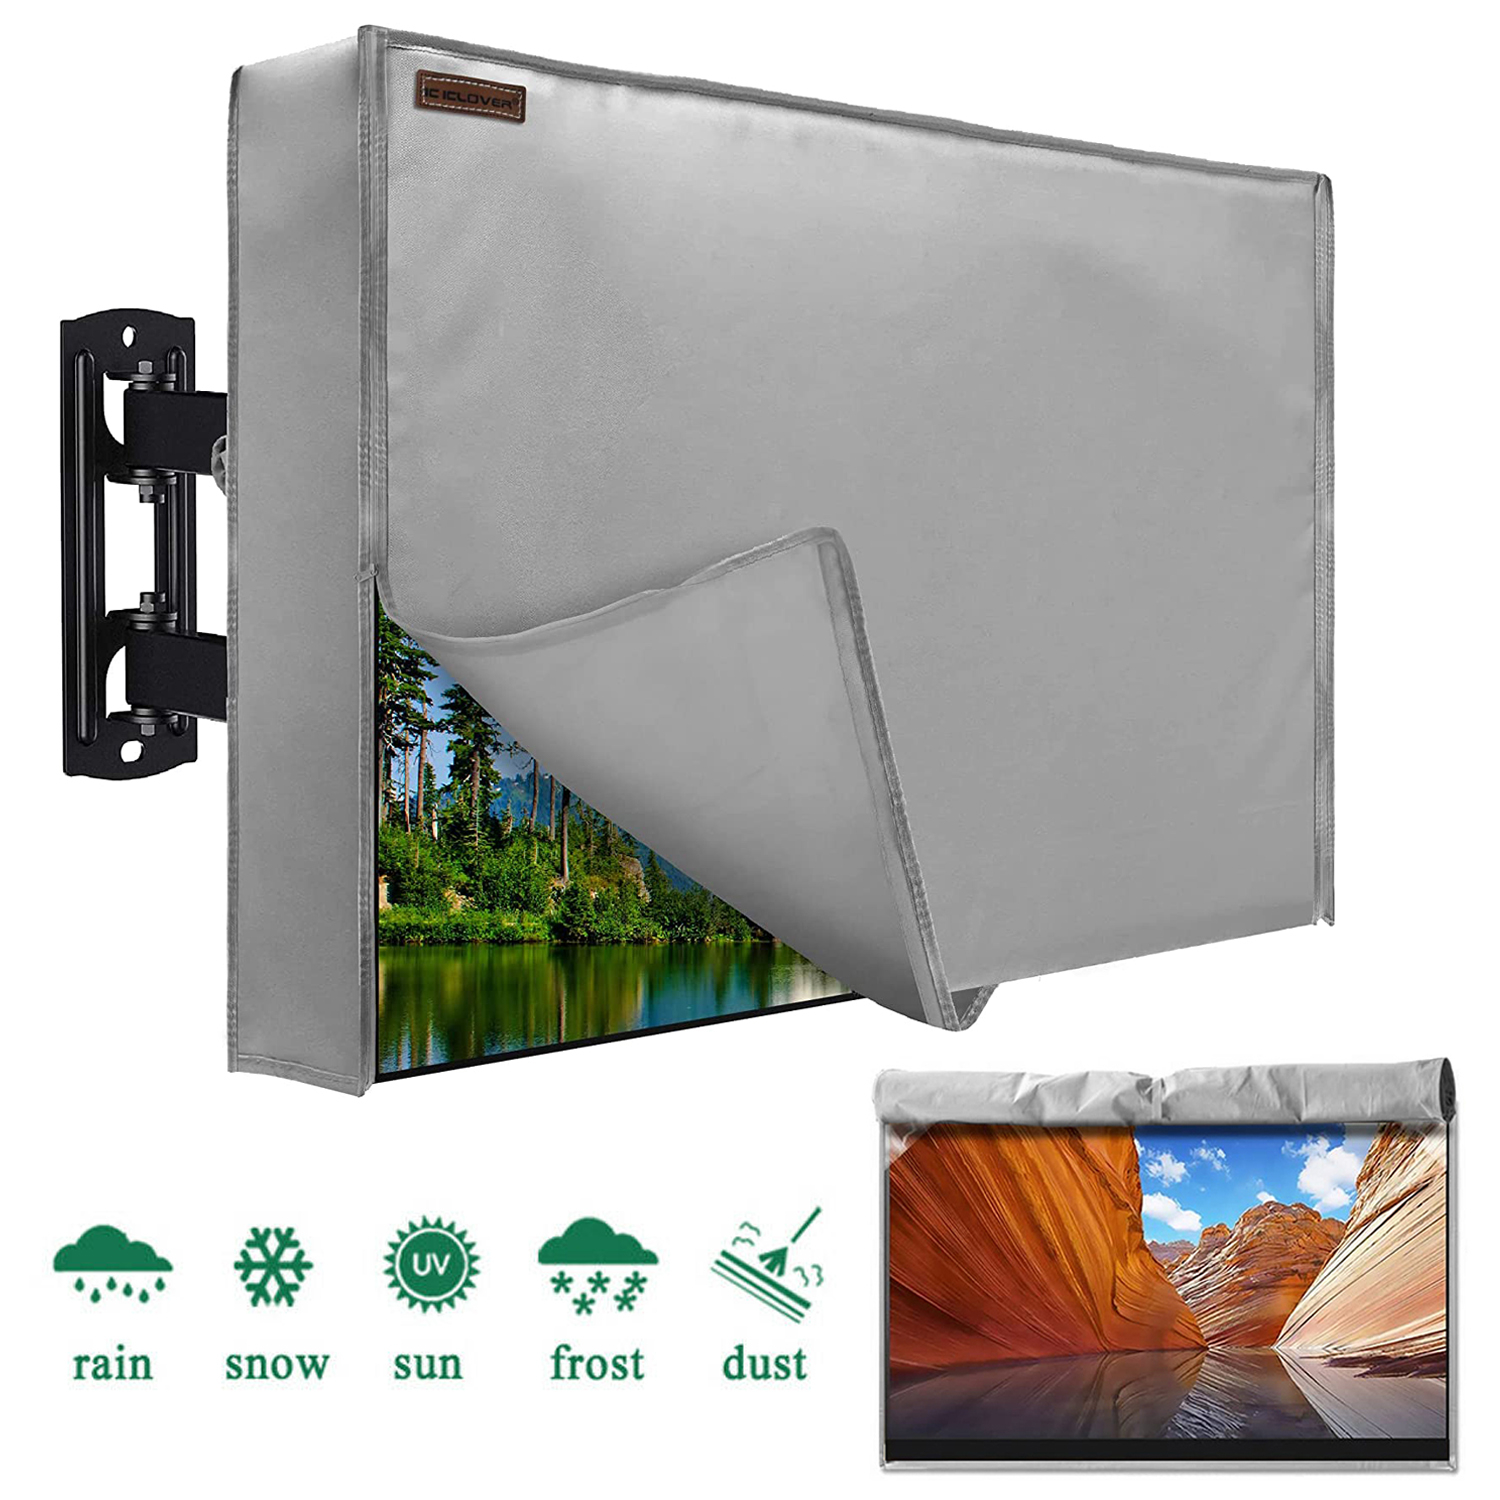 IC ICLOVER 52"-55" Outdoor Weatherproof LCD Plasma TV/Television Cover Flat Screen TV/Television Dustproof Protector with Waterproof Remote Pocket, Gray - image 1 of 9